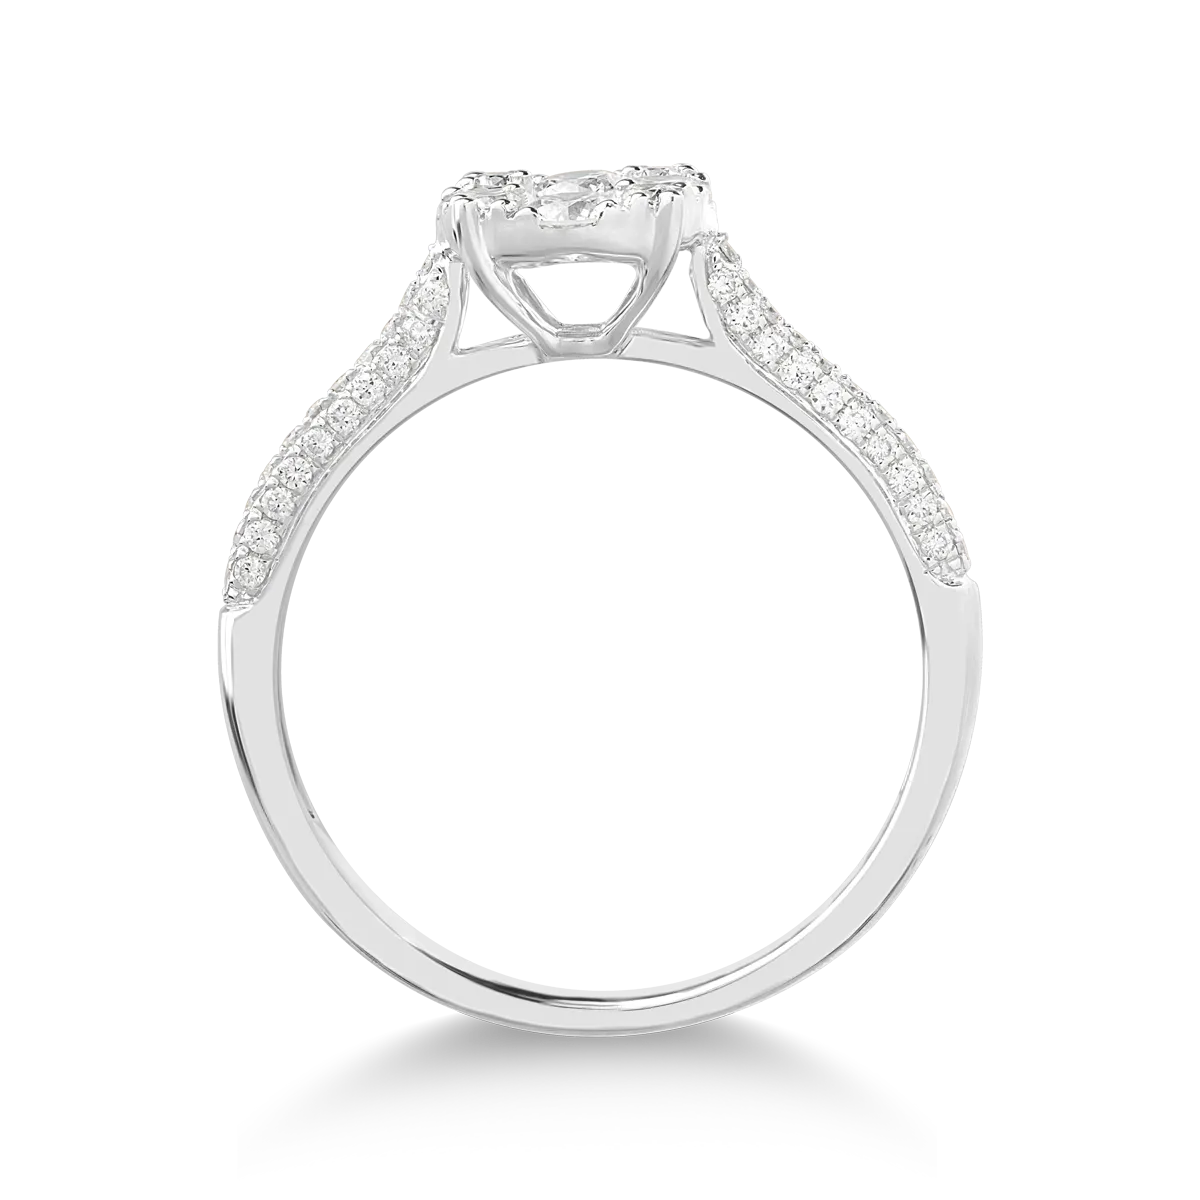 18K white gold ring with diamonds of 0.44ct